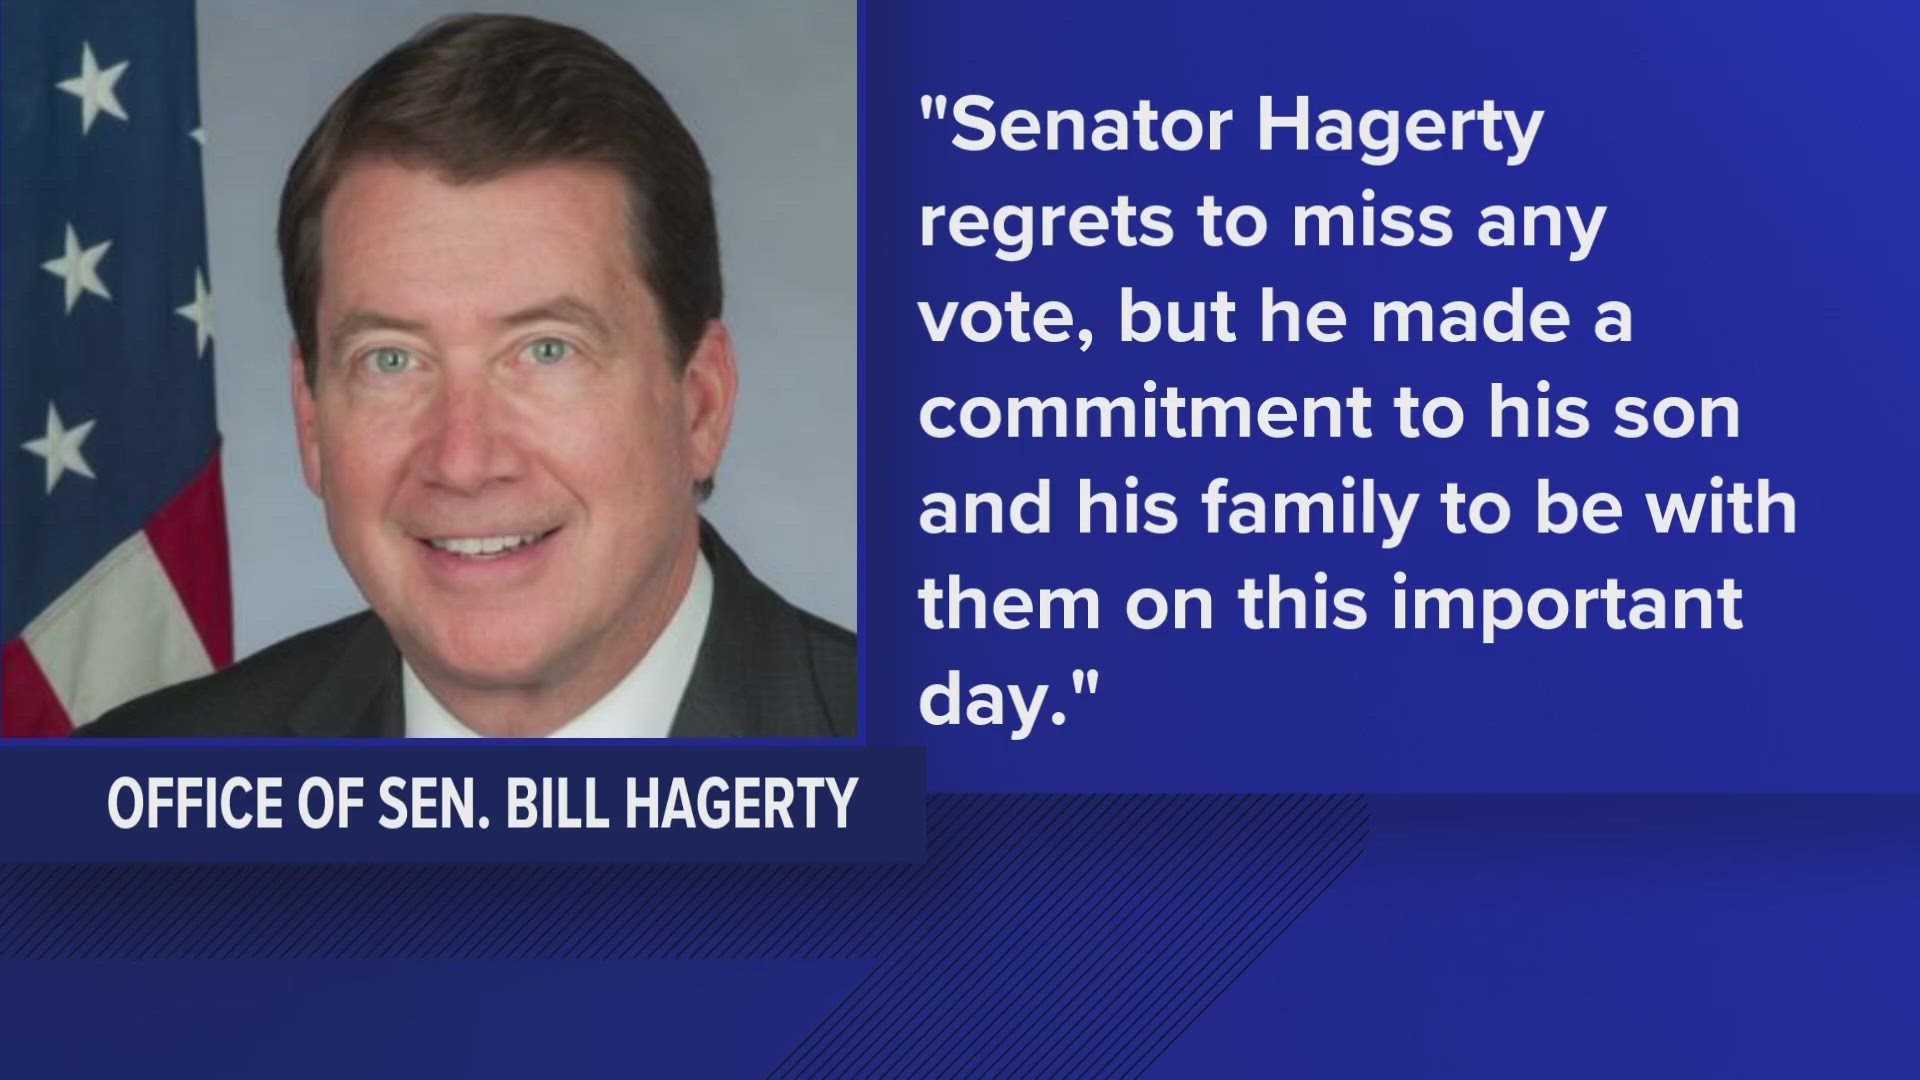 Sen. Hagerty's office released a statement that said he "made a commitment to his son and his family to be with them on this important day."